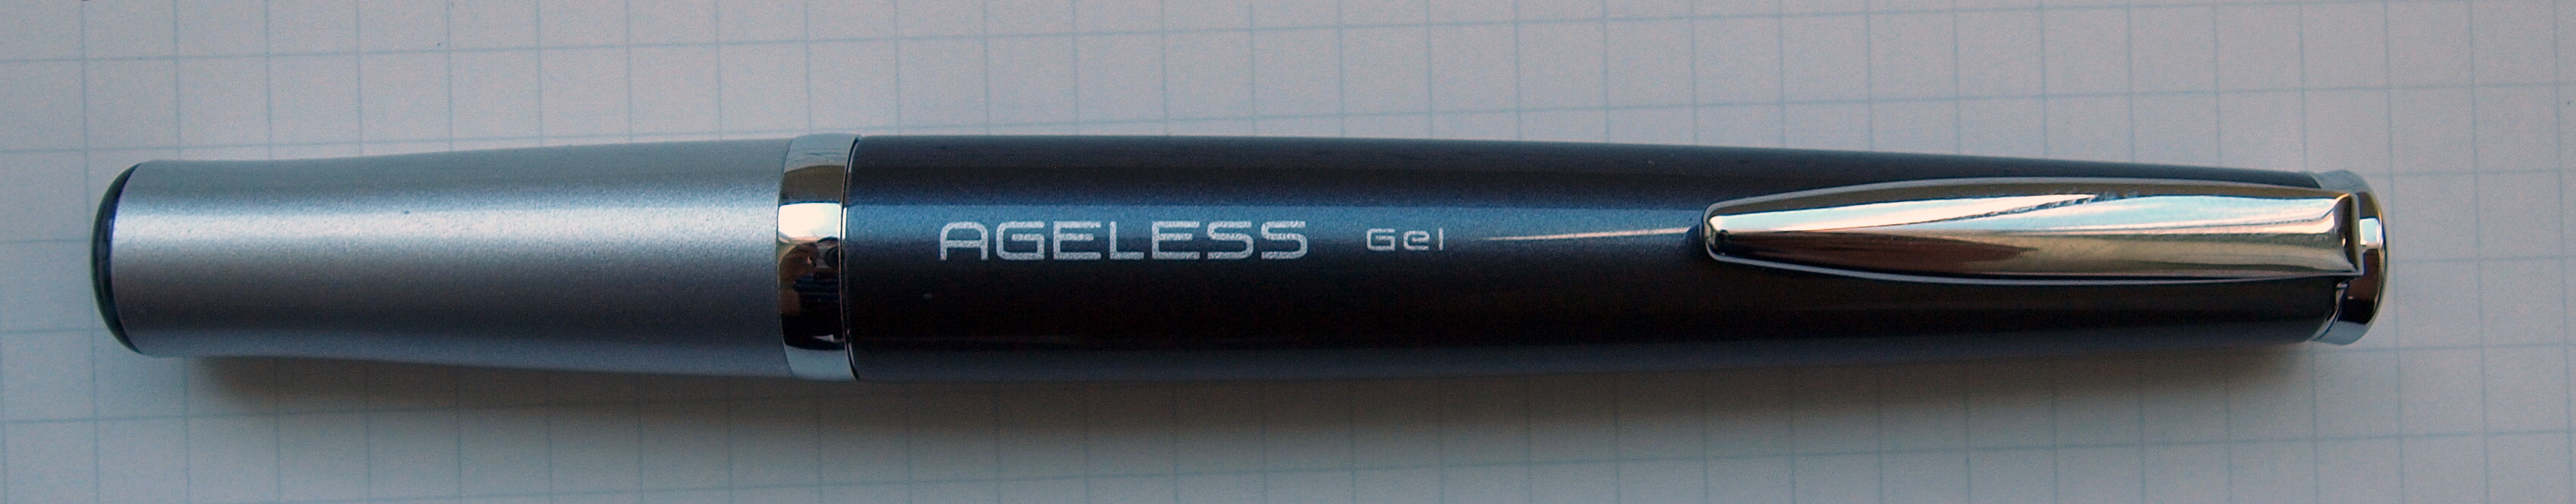 Pilot Ageless Pen - tip position 1 - fully retracted